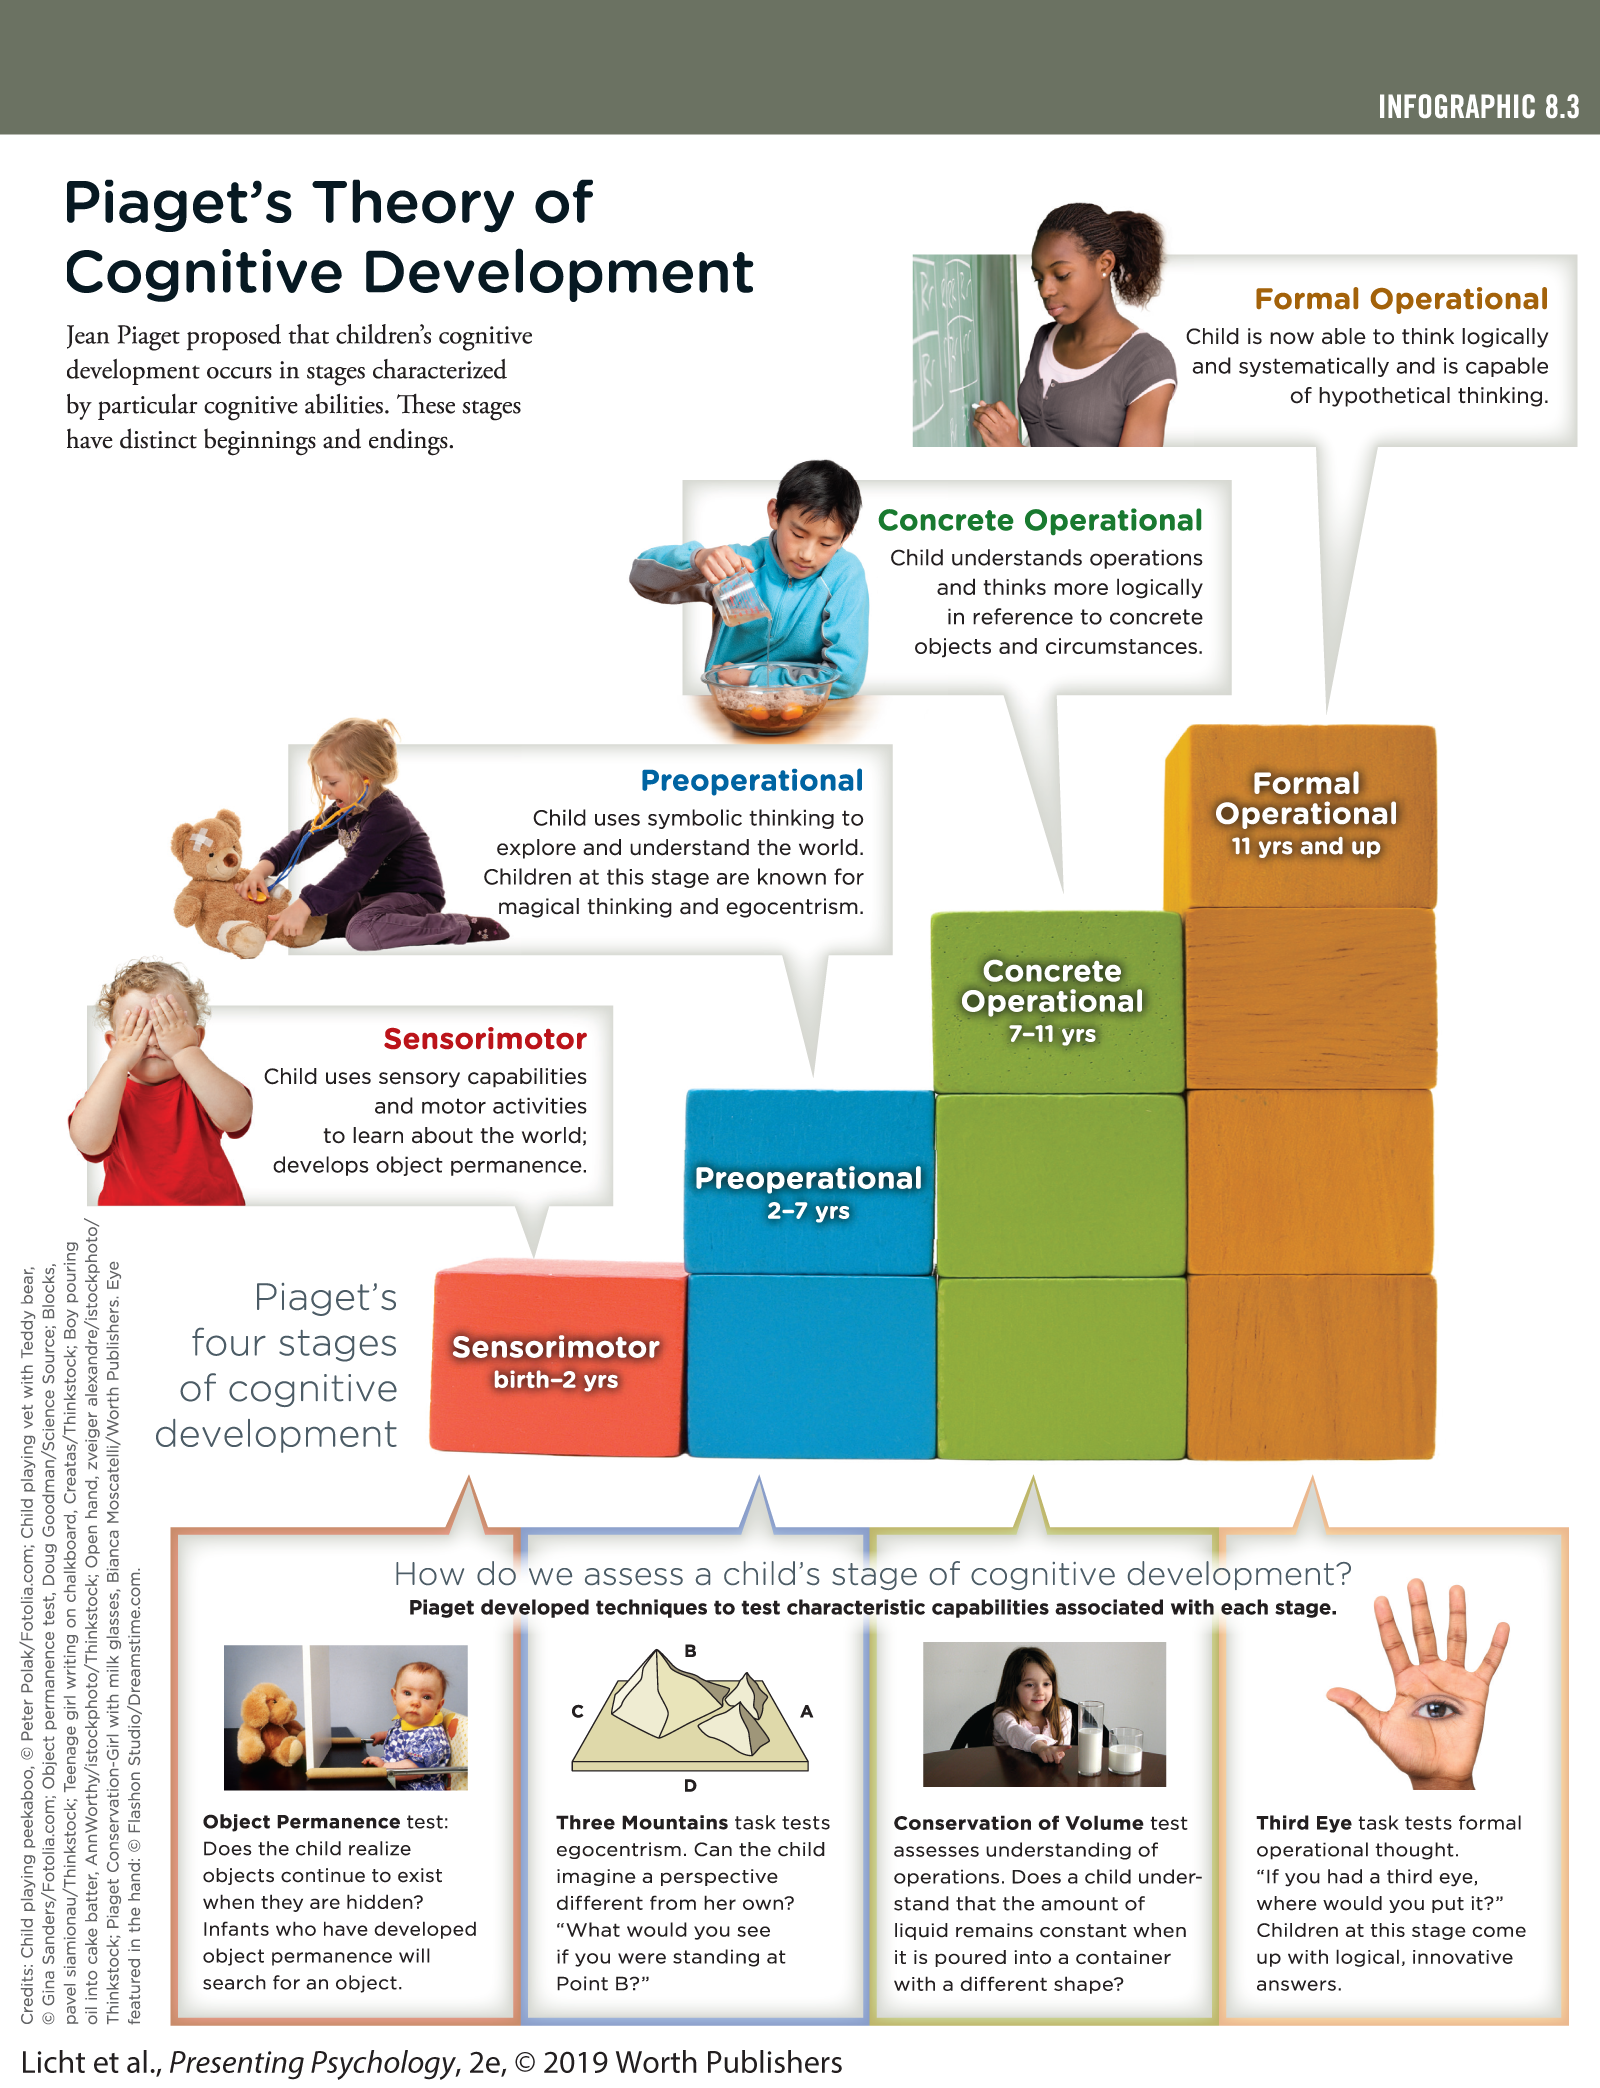 current research on cognitive development indicates that